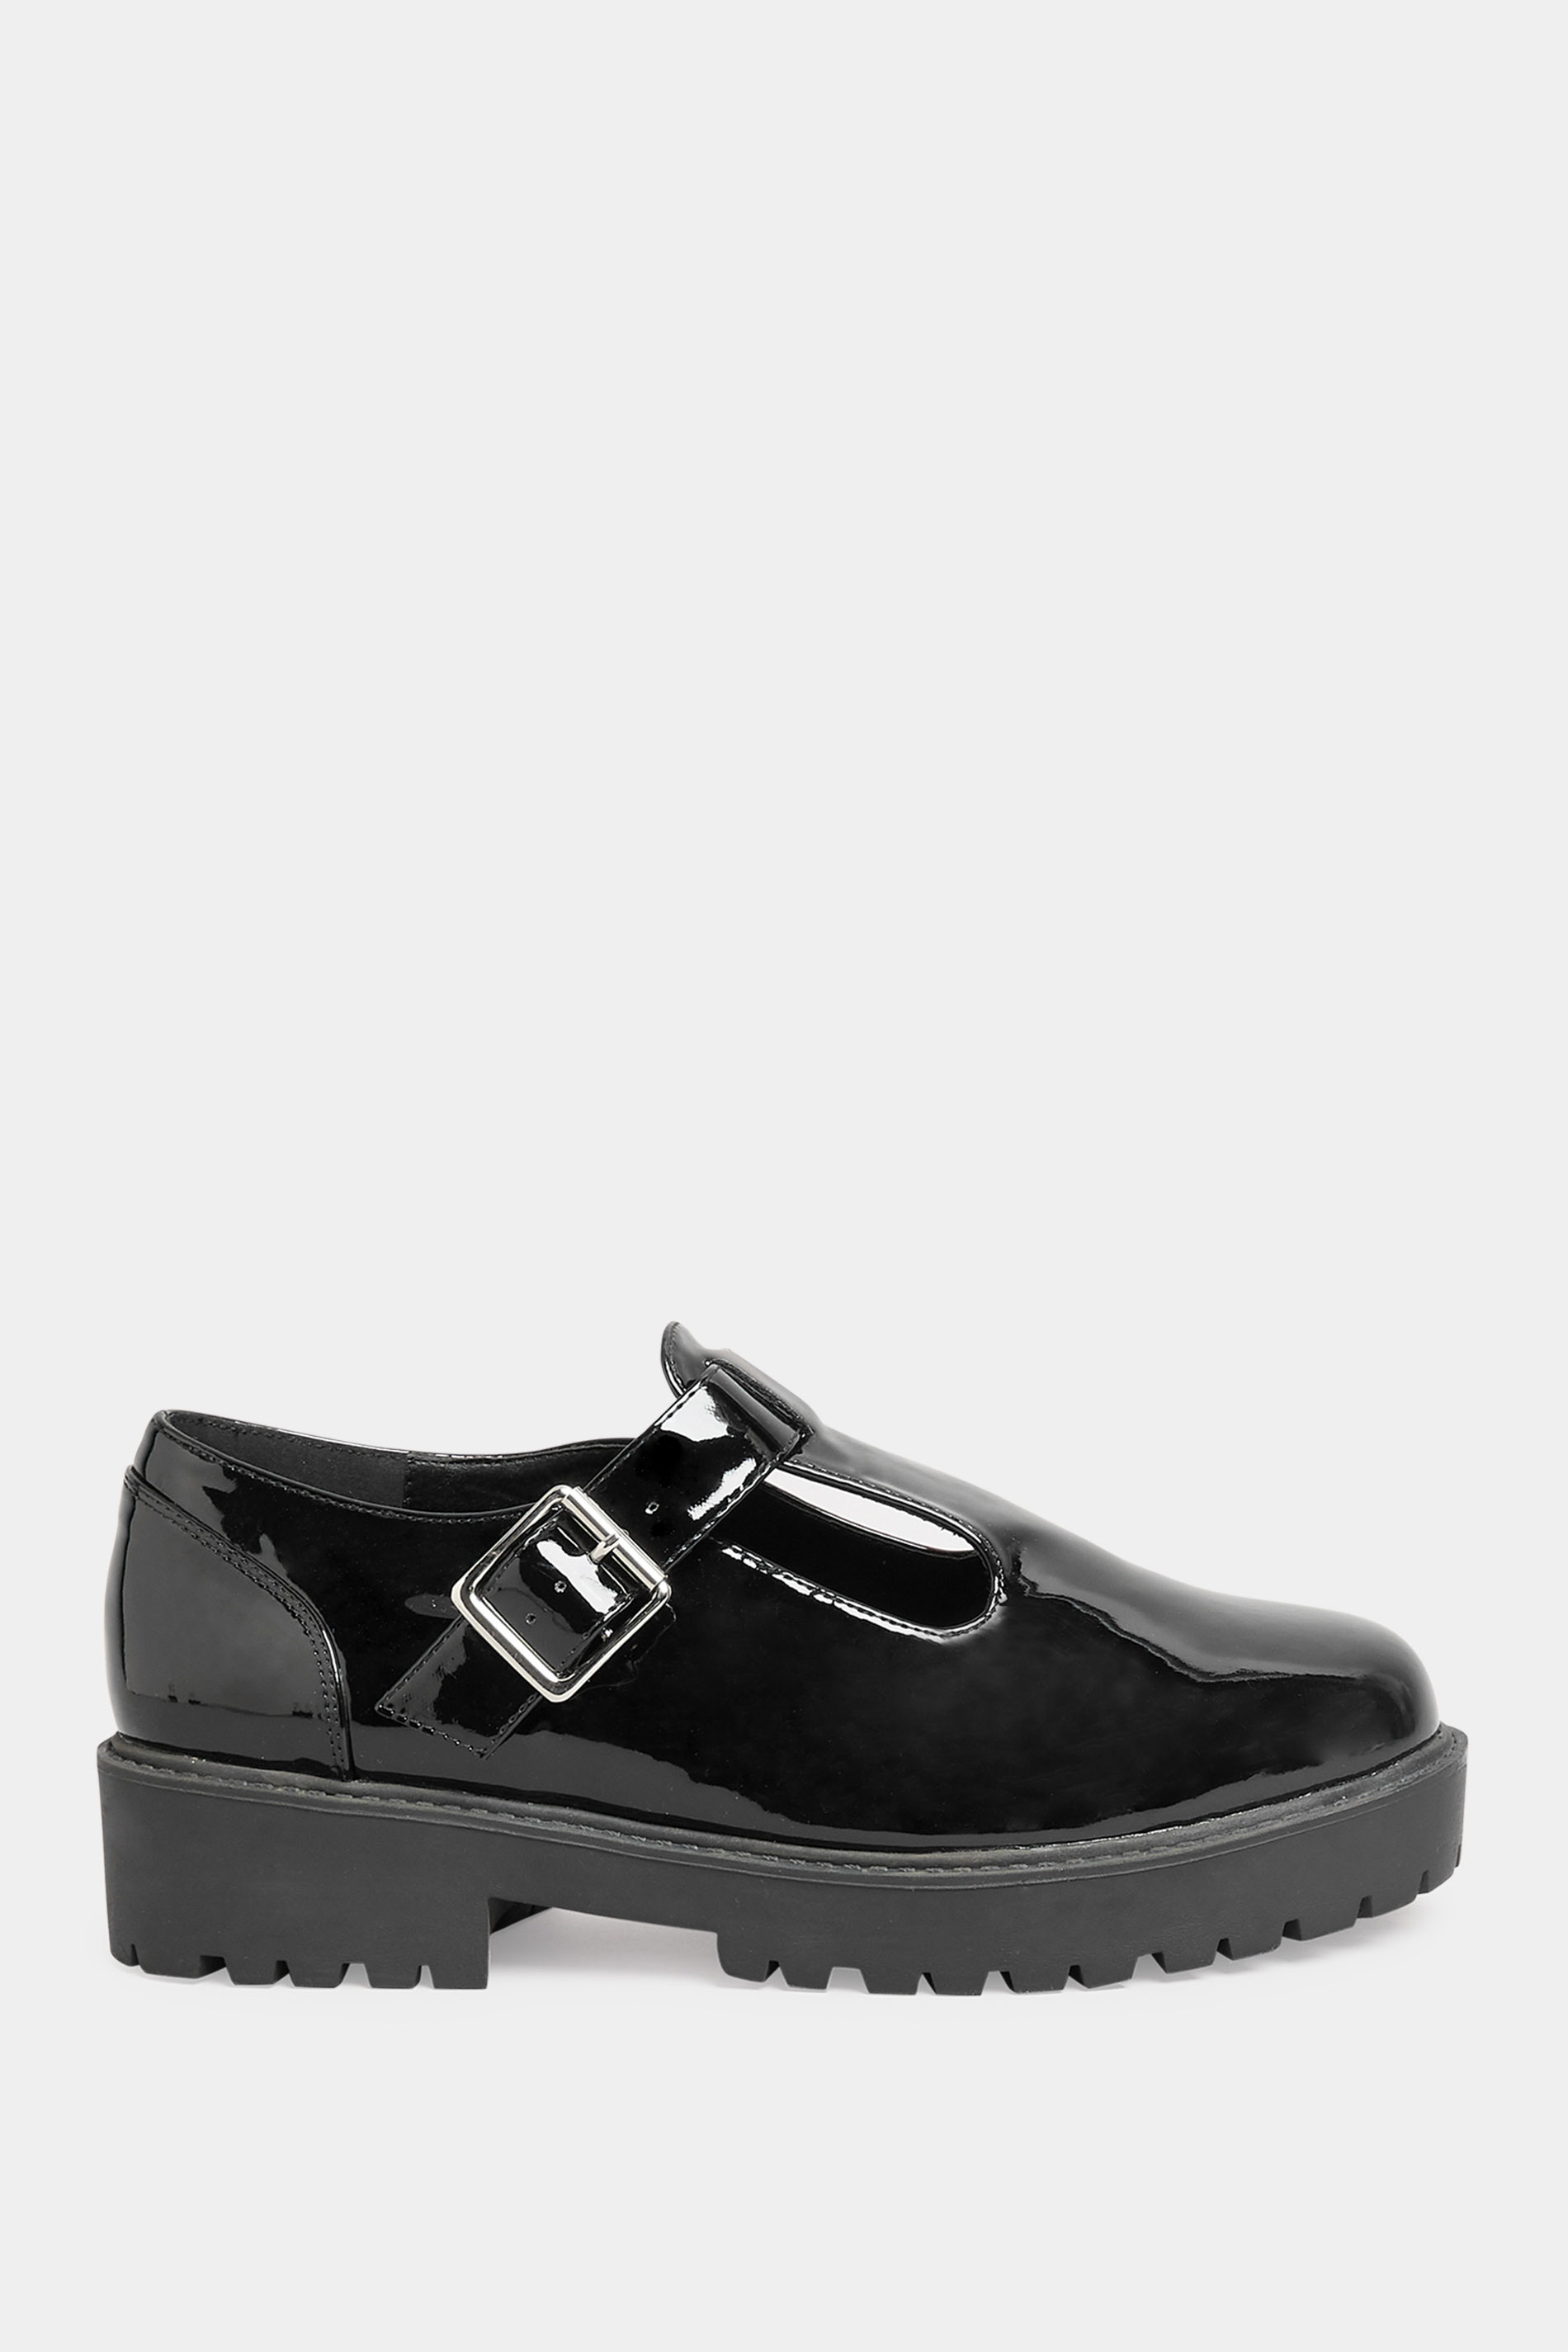 Black Patent Chunky T Bar Mary Jane Shoes In Extra Wide EEE Fit | Yours ...